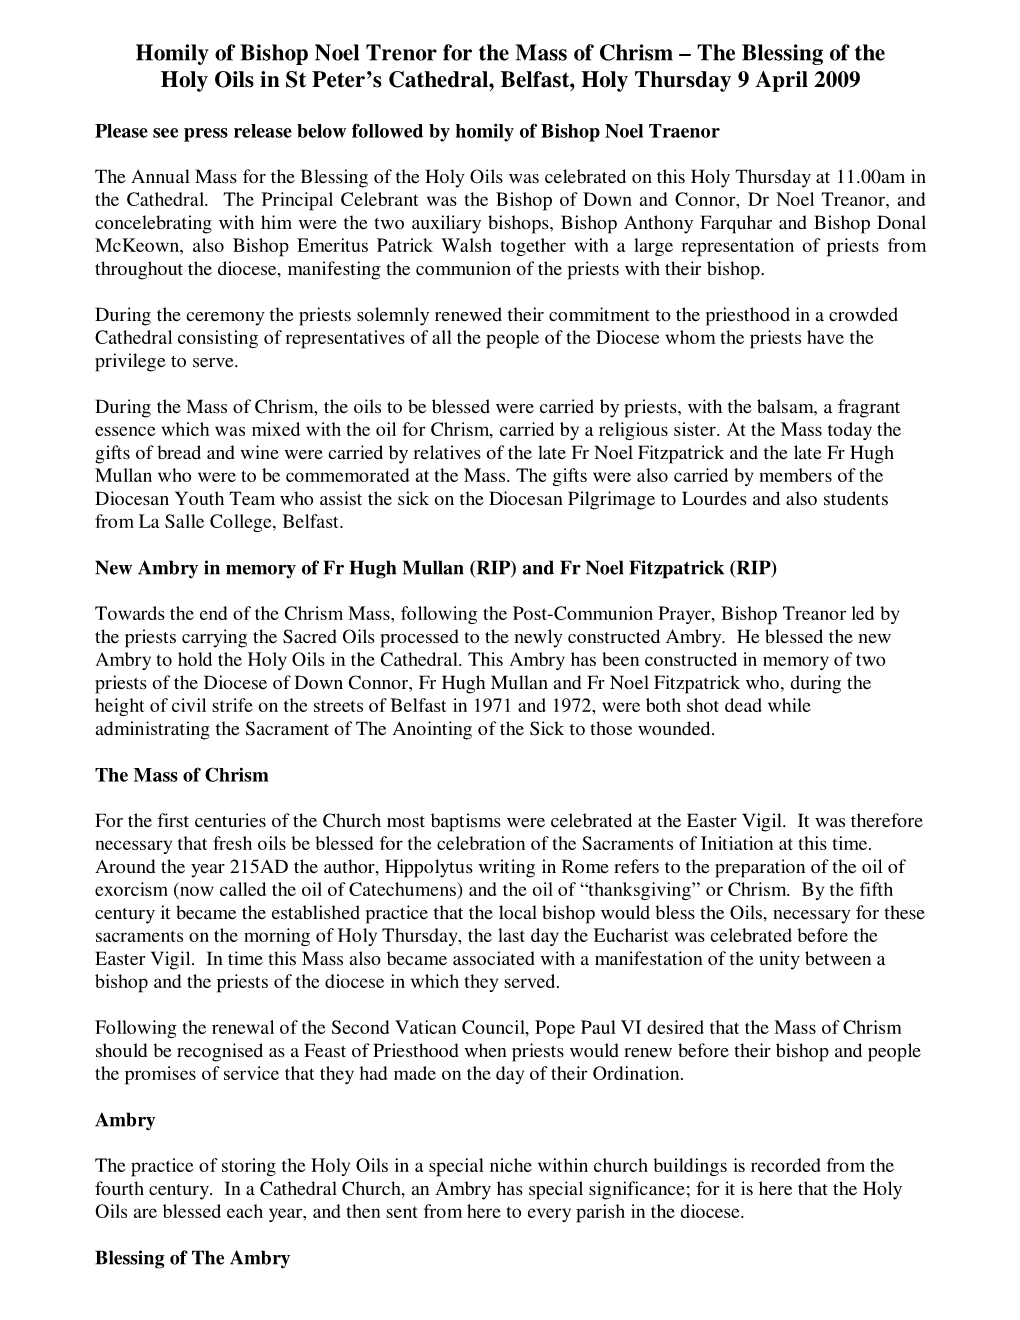 Homily of Bishop Noel Trenor for the Mass of Chrism – the Blessing of the Holy Oils in St Peter’S Cathedral, Belfast, Holy Thursday 9 April 2009